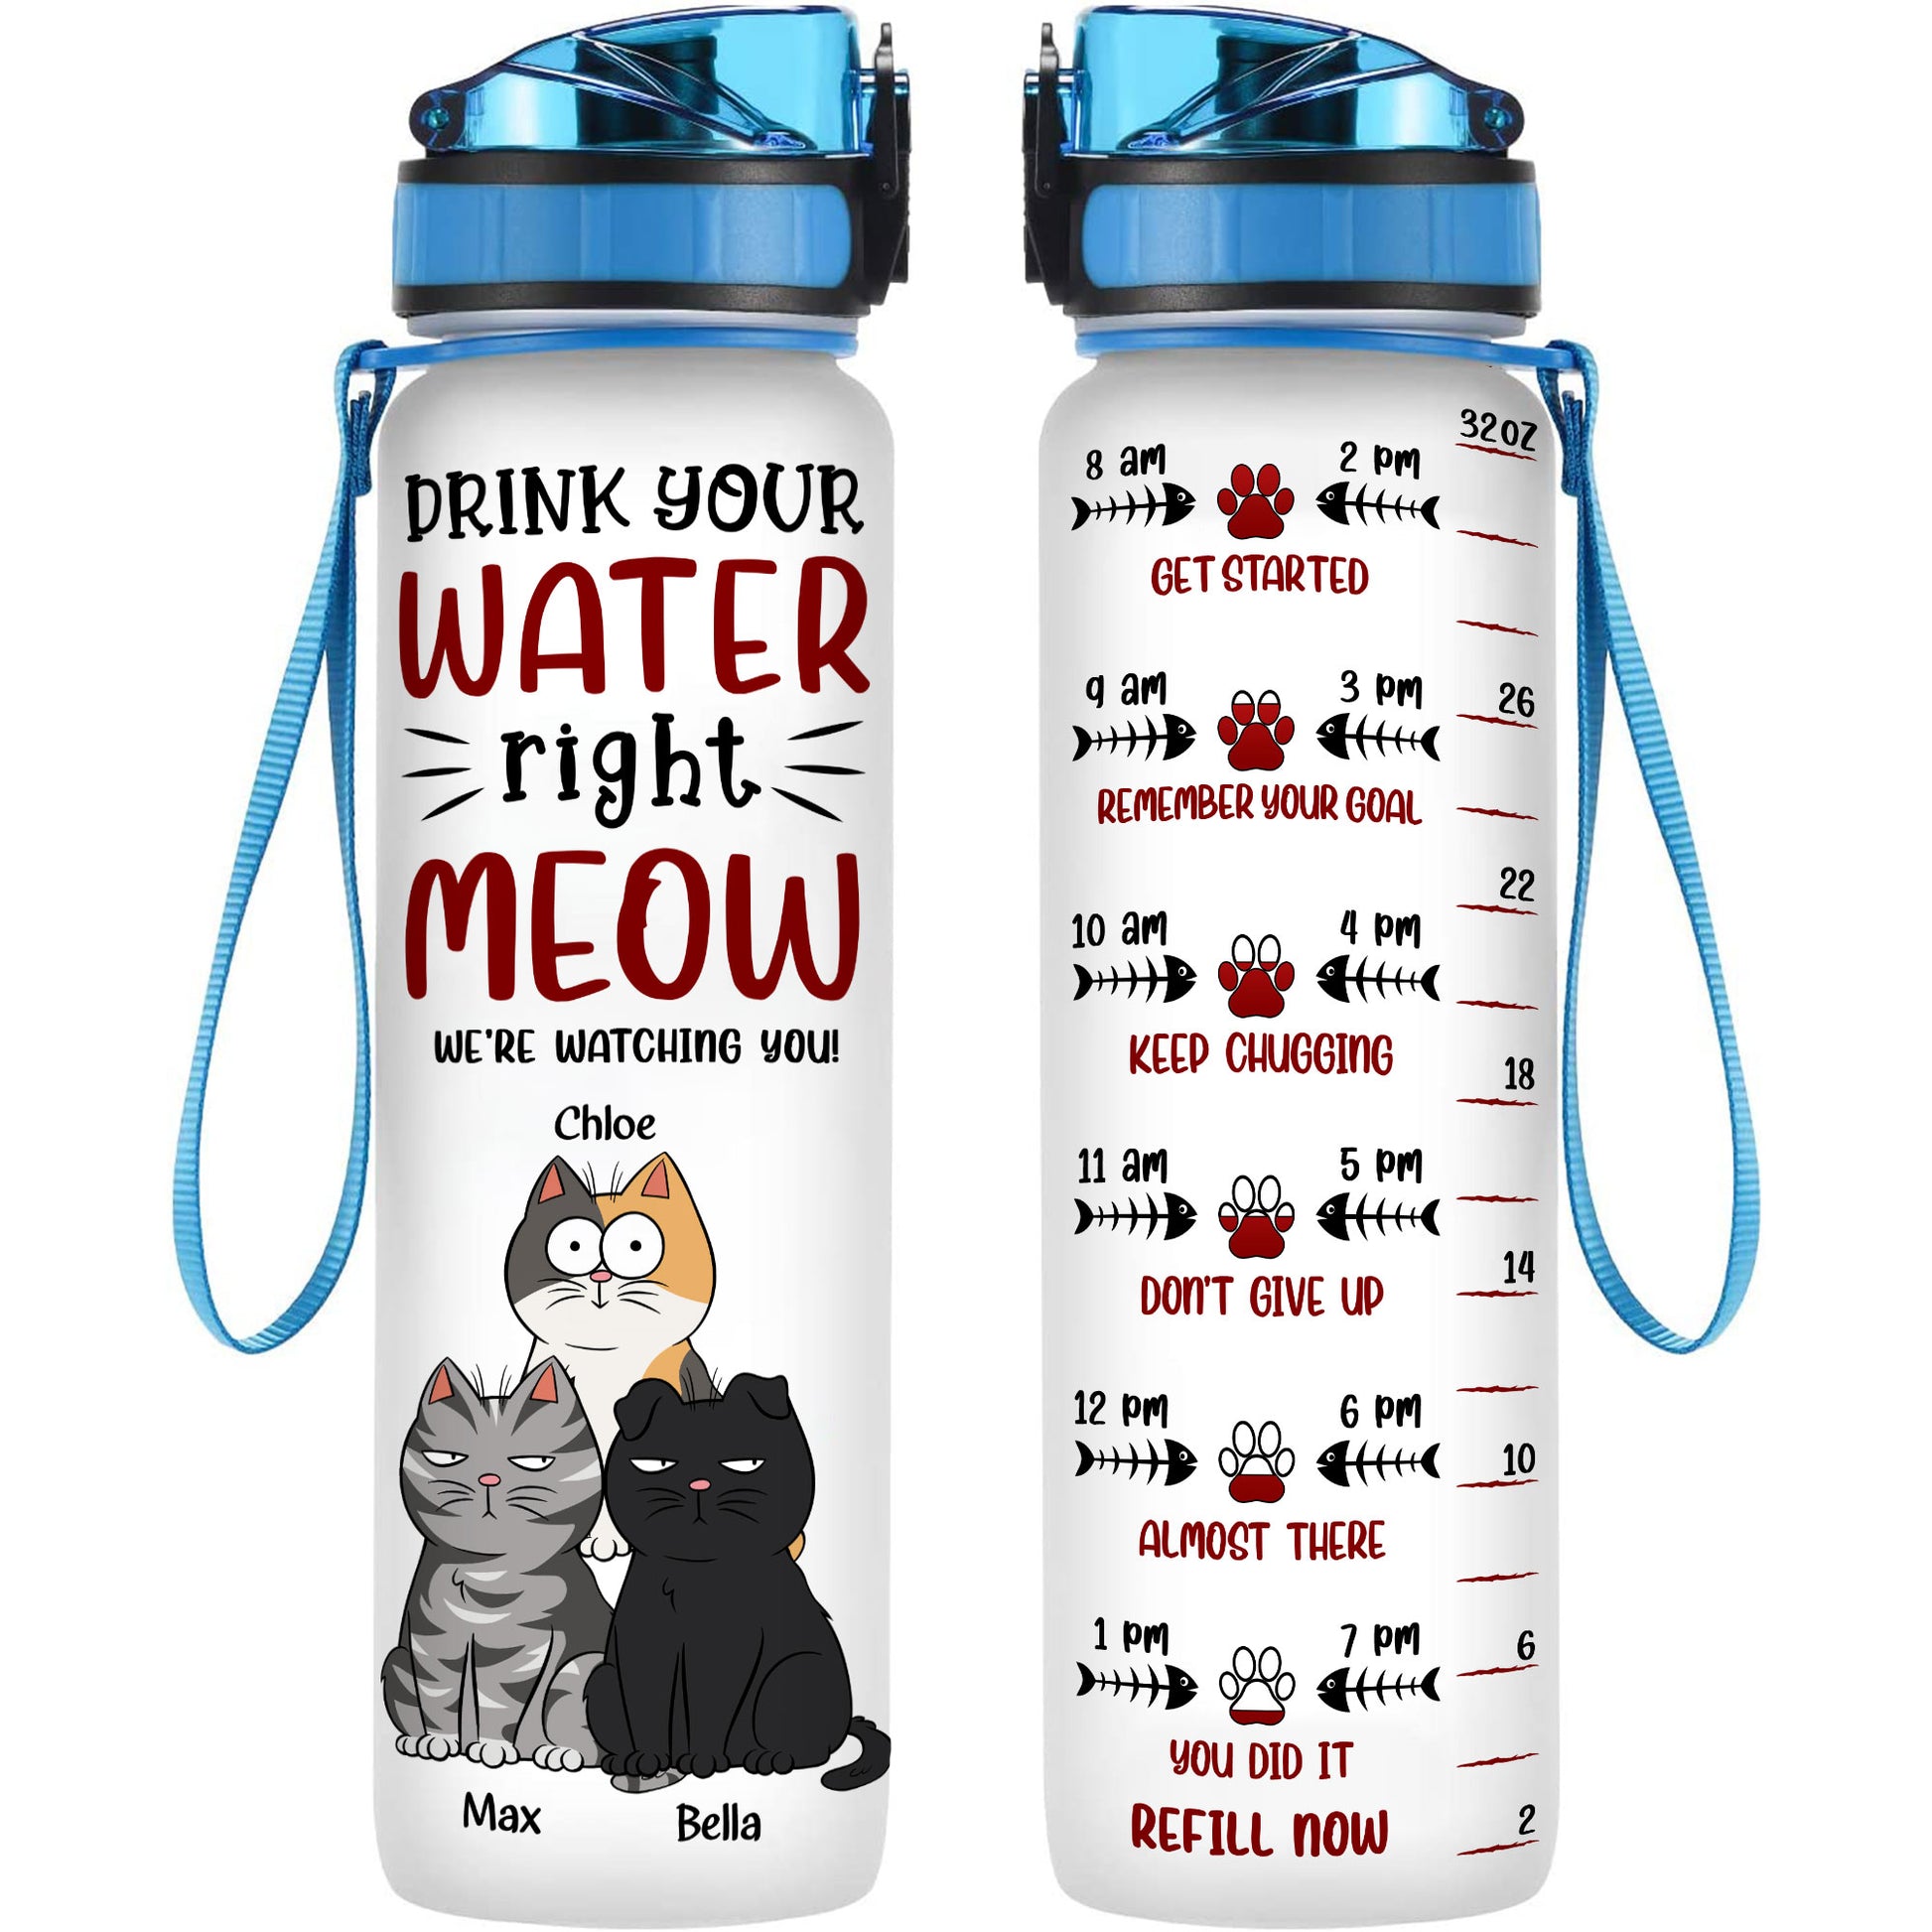 https://macorner.co/cdn/shop/files/Drink-Your-Water-Right-Meow-Personalized-Water-Bottle-With-Time-Marker_4.jpg?v=1686214621&width=1946